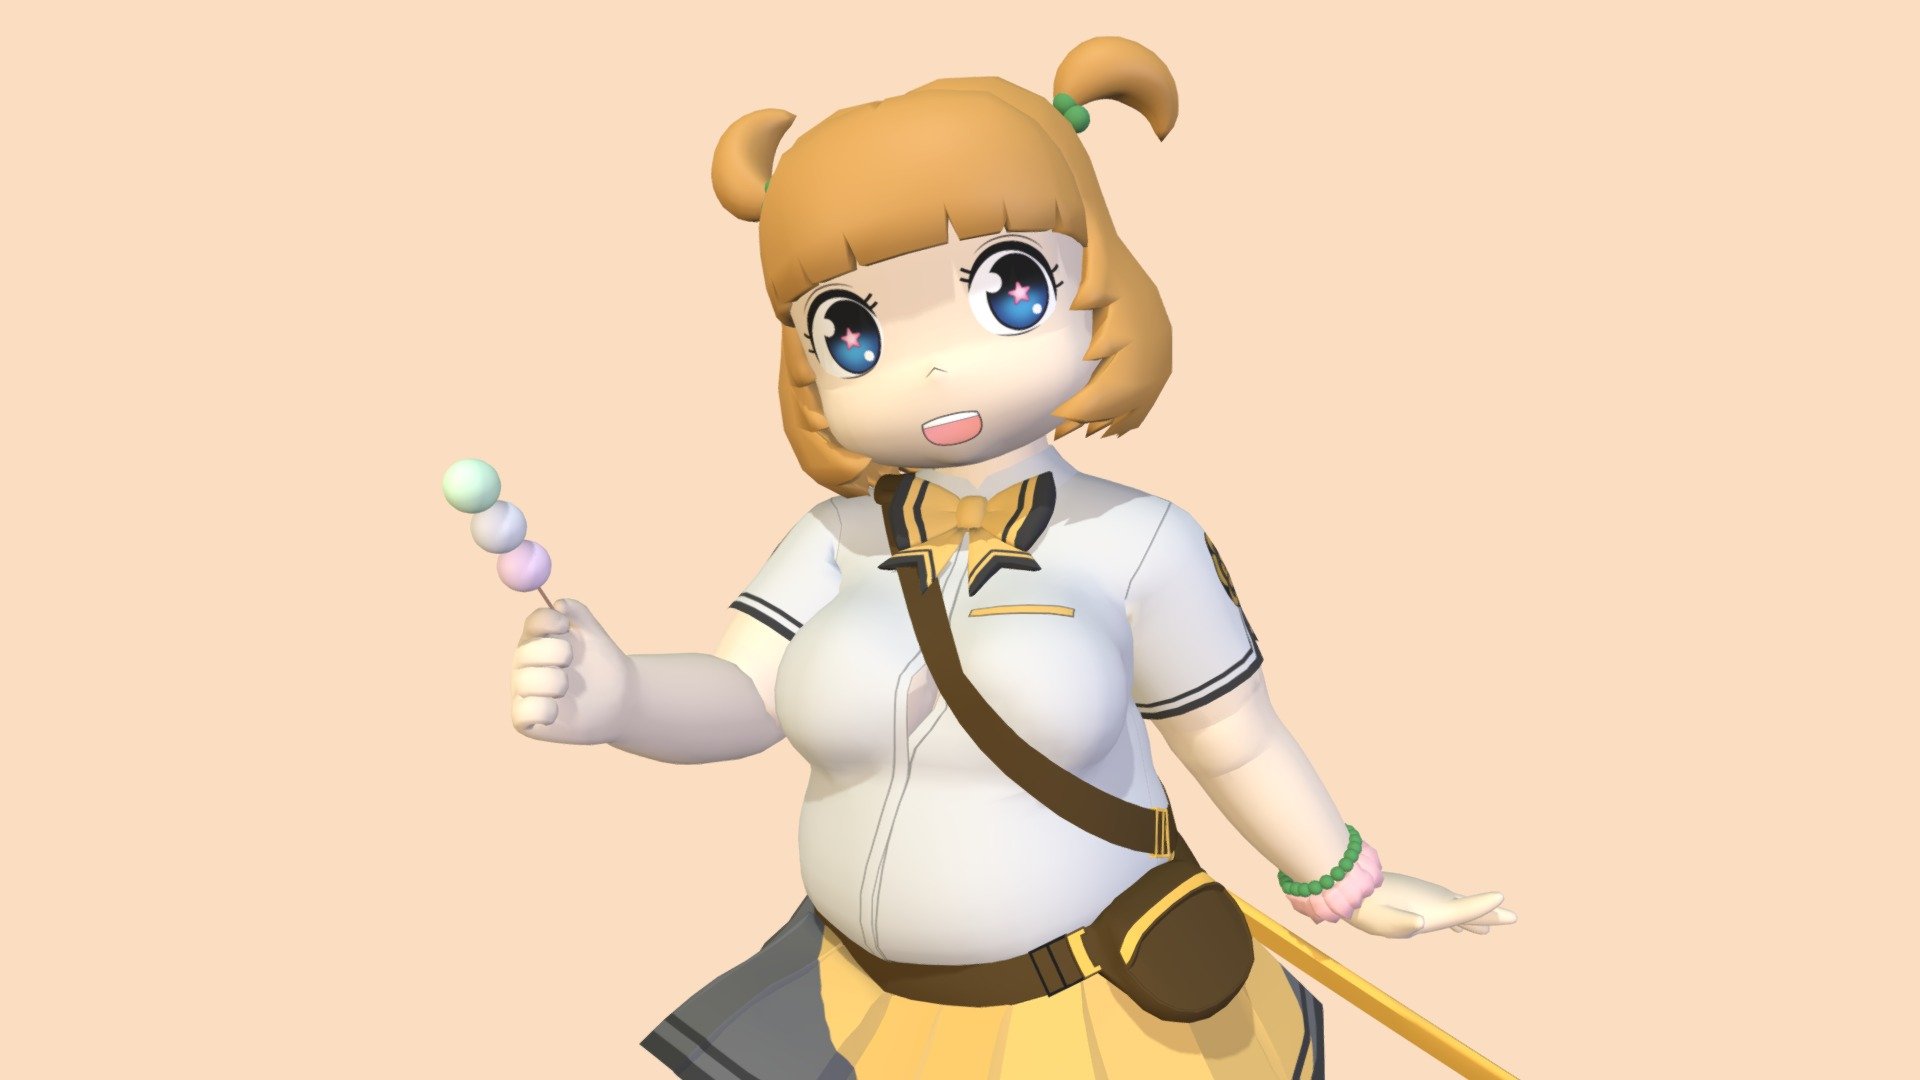 I love this character so much, I just had to make a 3D model of her. She's just so cute!

Rendered version on my Pixiv: https://www.pixiv.net/en/artworks/81338691 - Shinken!! Hasebe Shikiri - 3D model by Nosh59 3d model